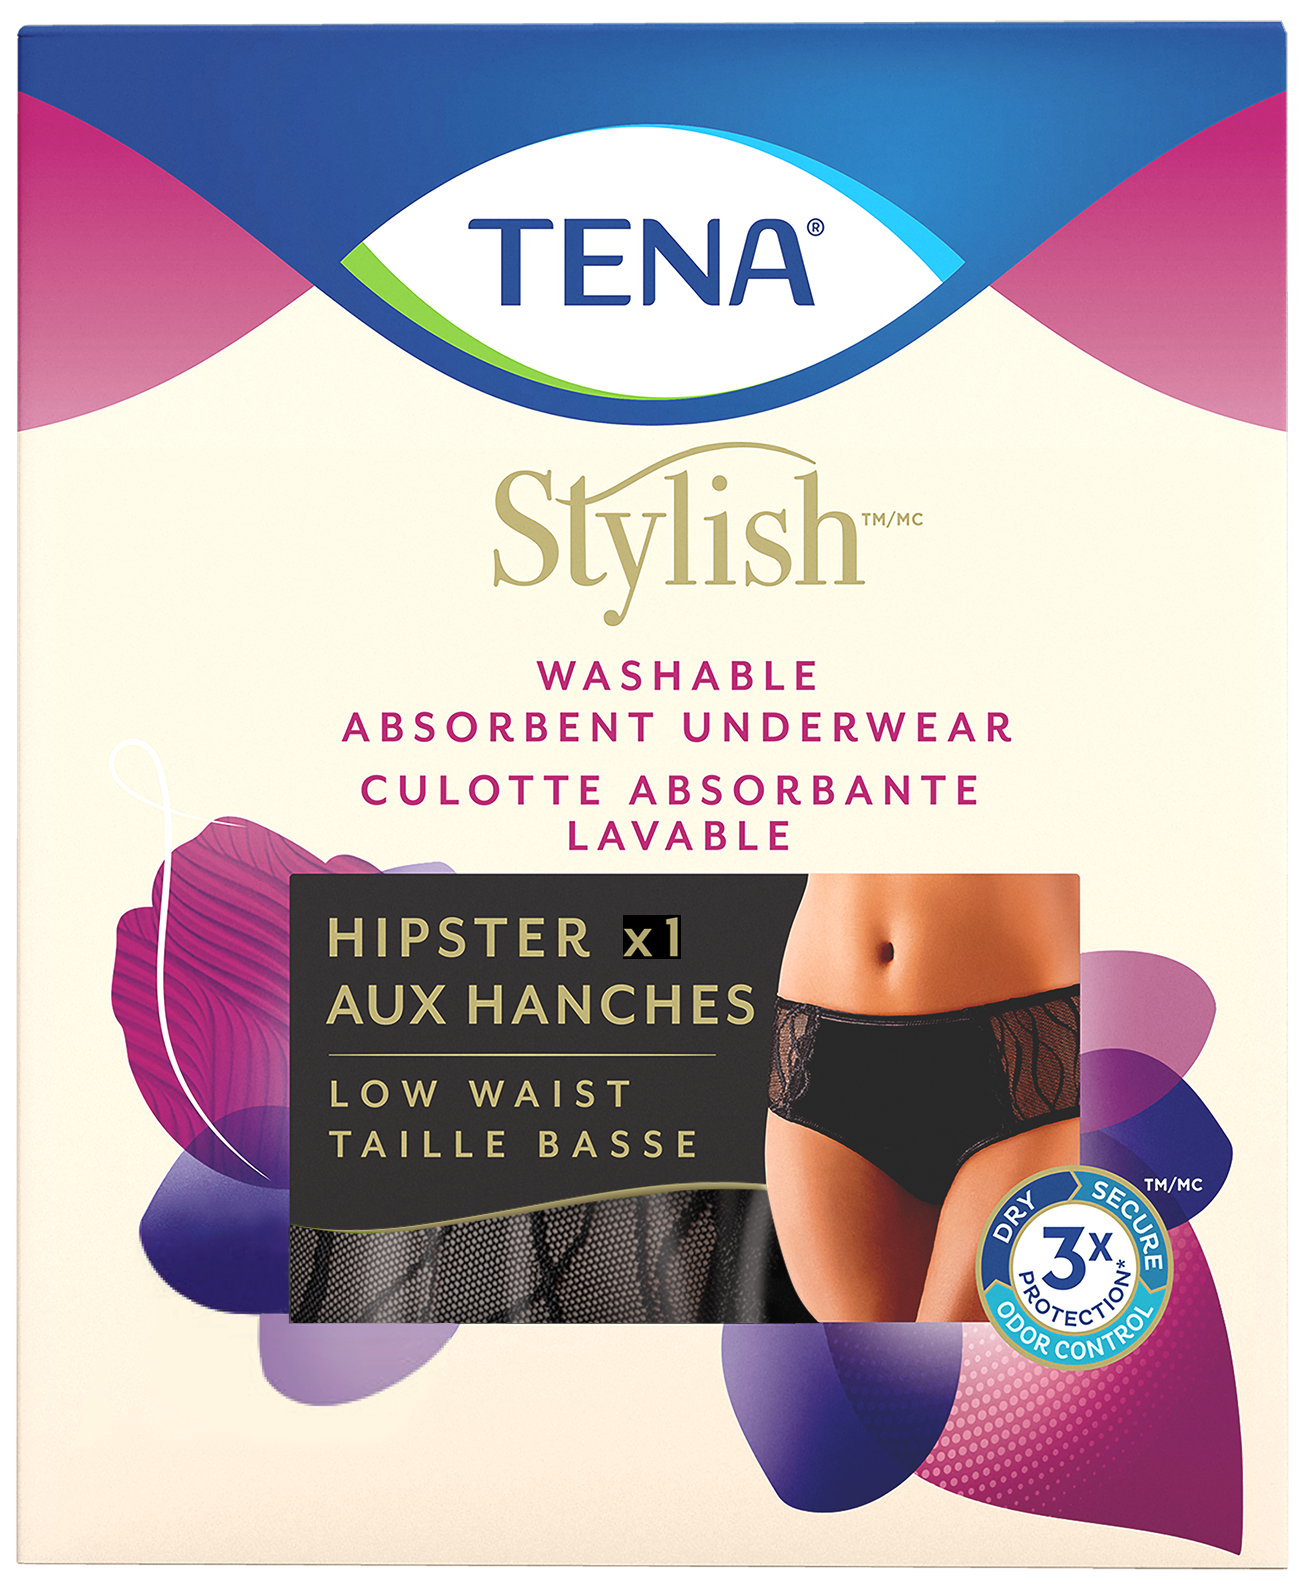 TENA Stylish Washable Absorbent Underwear for light leaks | Hipster | Black